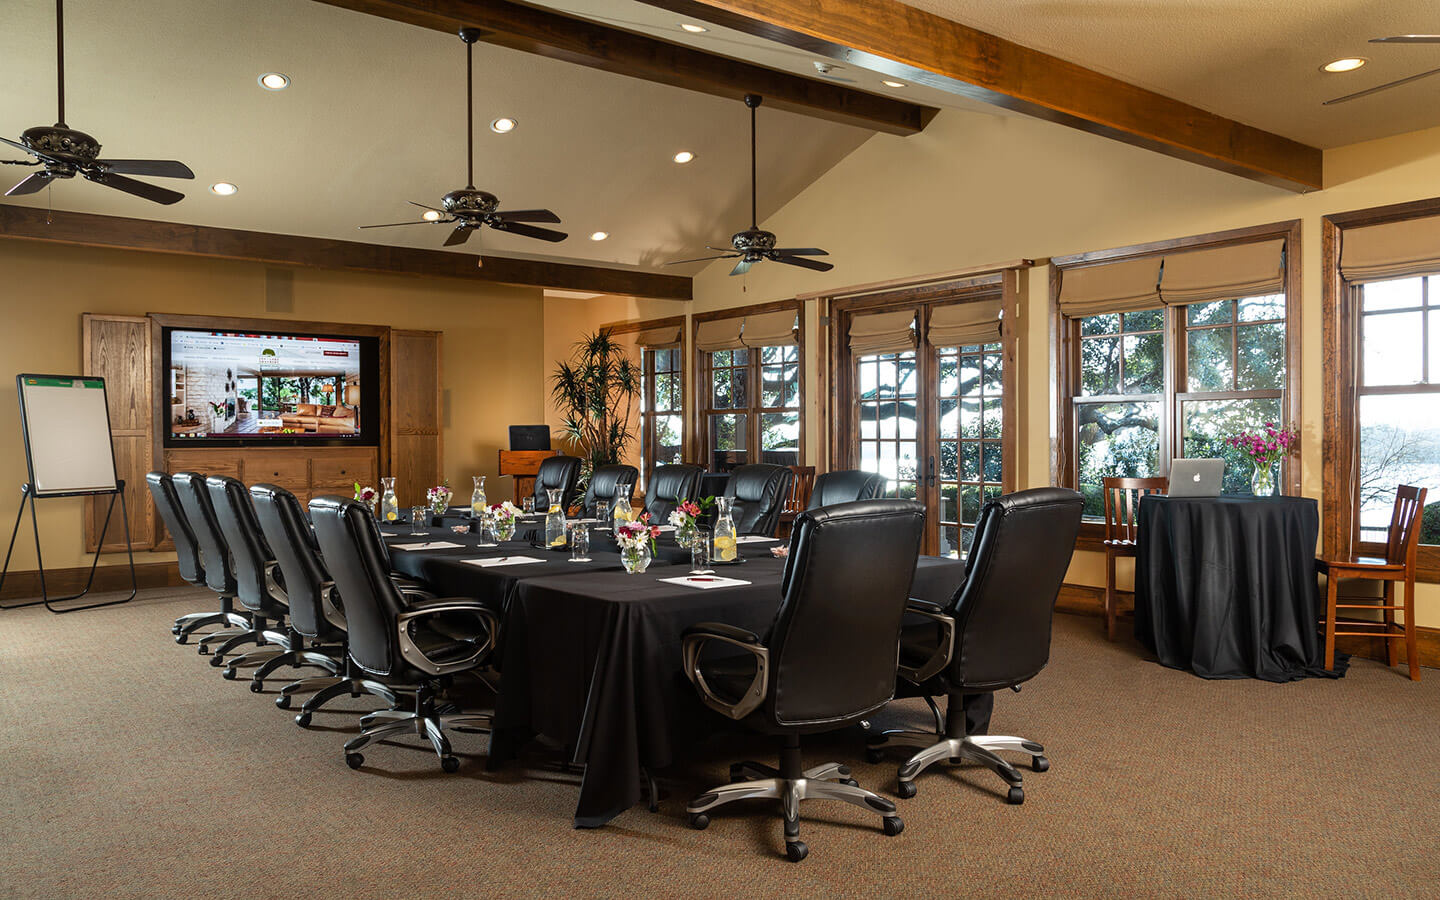 Conference room accommodations at the Inn on Lake Granbury